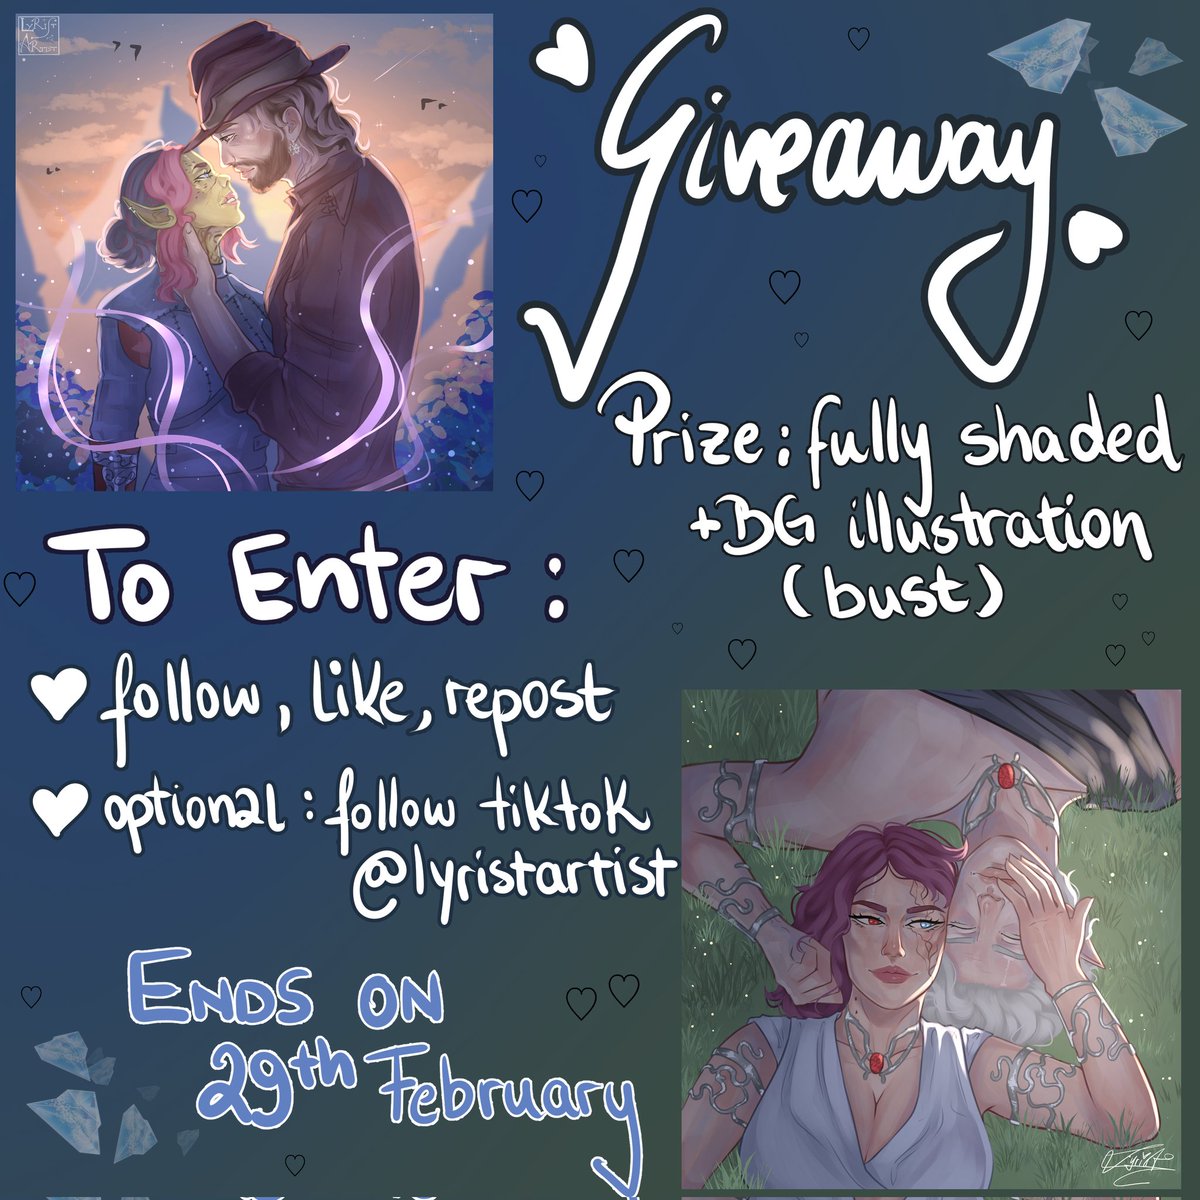 Hosting an ART GIVEAWAY! The winner will get a fully shaded (bust) illustration (max 2 characters). 🗡 follow, like, repost. 🗡 optional: follow on tiktok! tiktok.com/@lyristartist?… ENDS on the 29th of February. Good luck!! ♥️